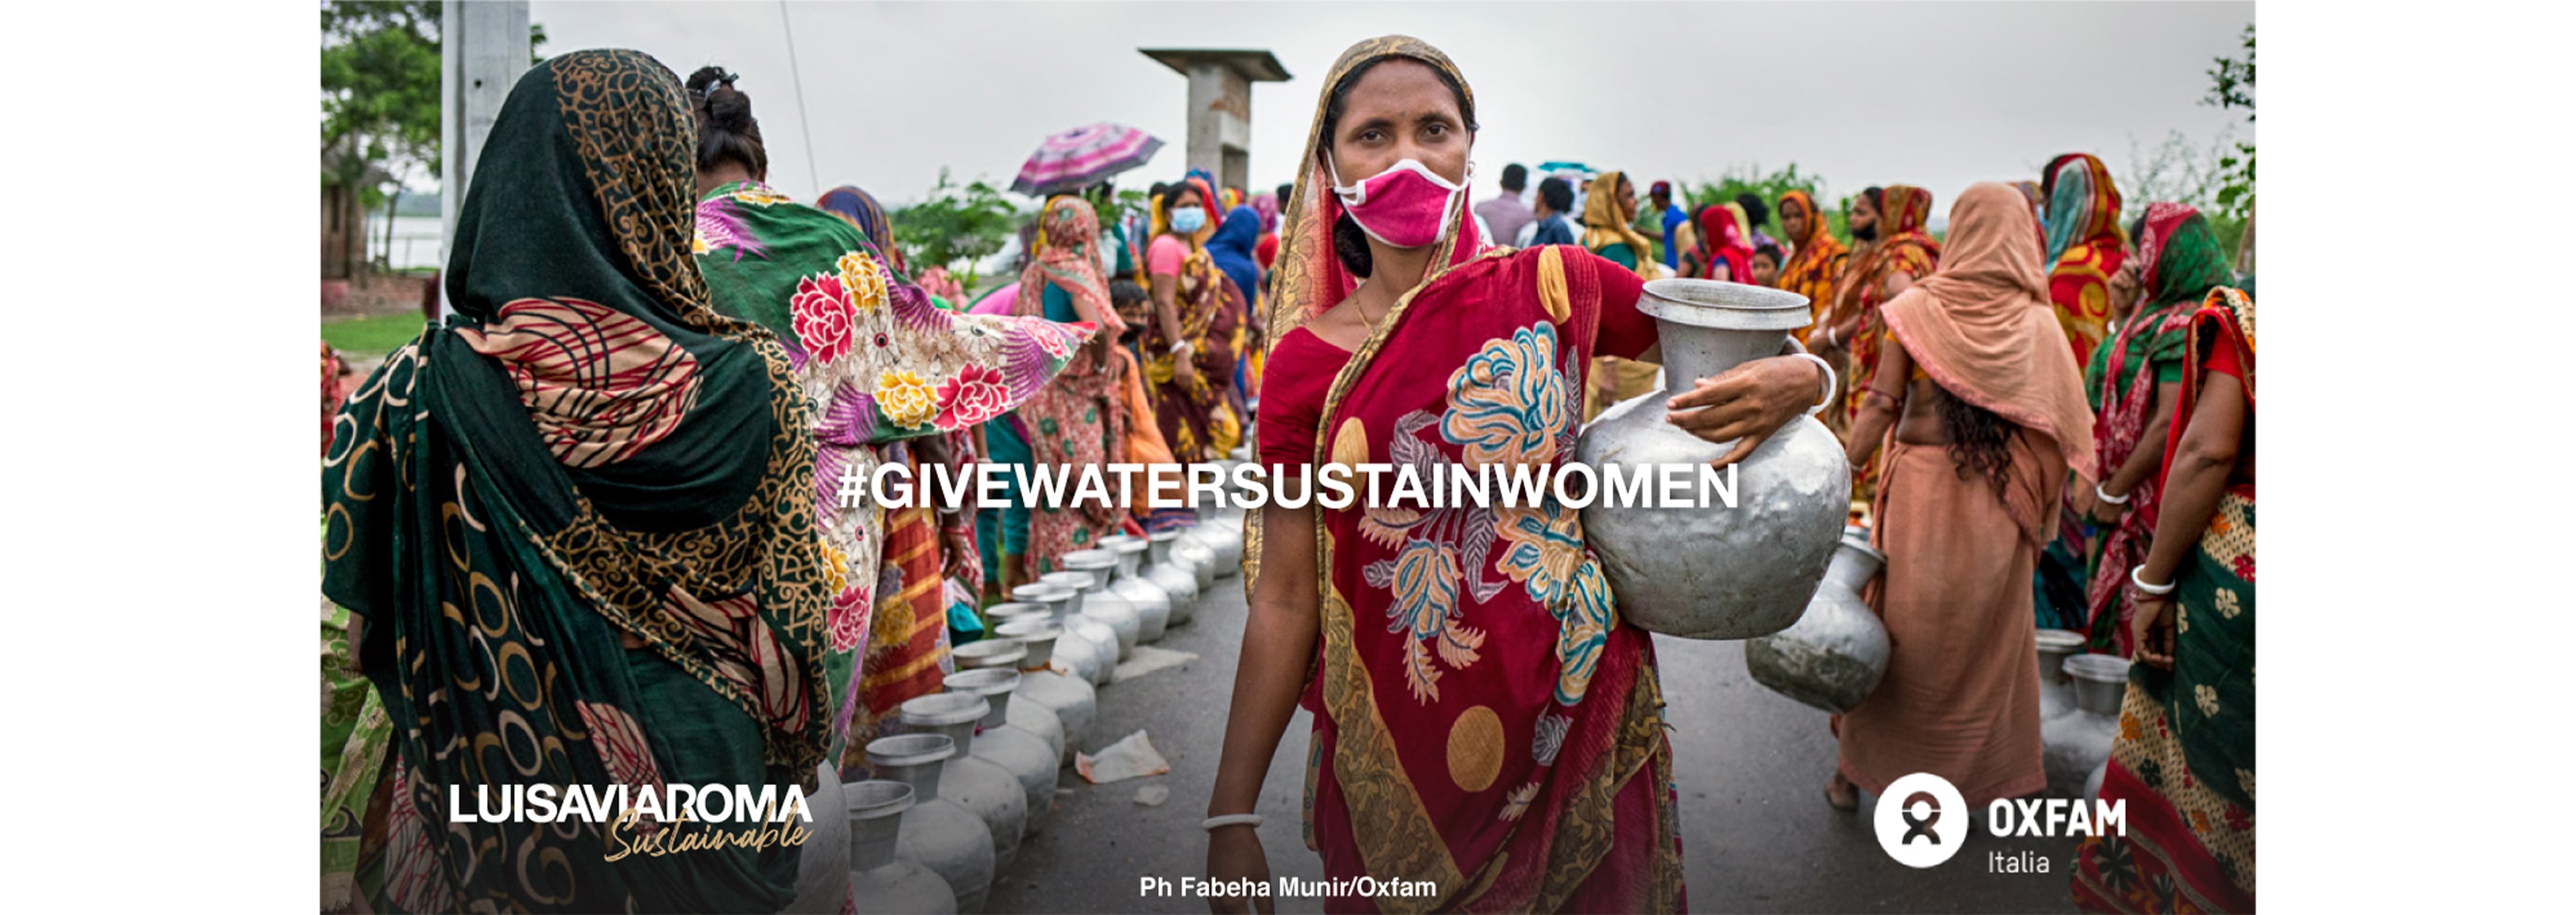 LVRSustainable & Oxfam Italy 후원 캠페인: Give Water, Sustain Women